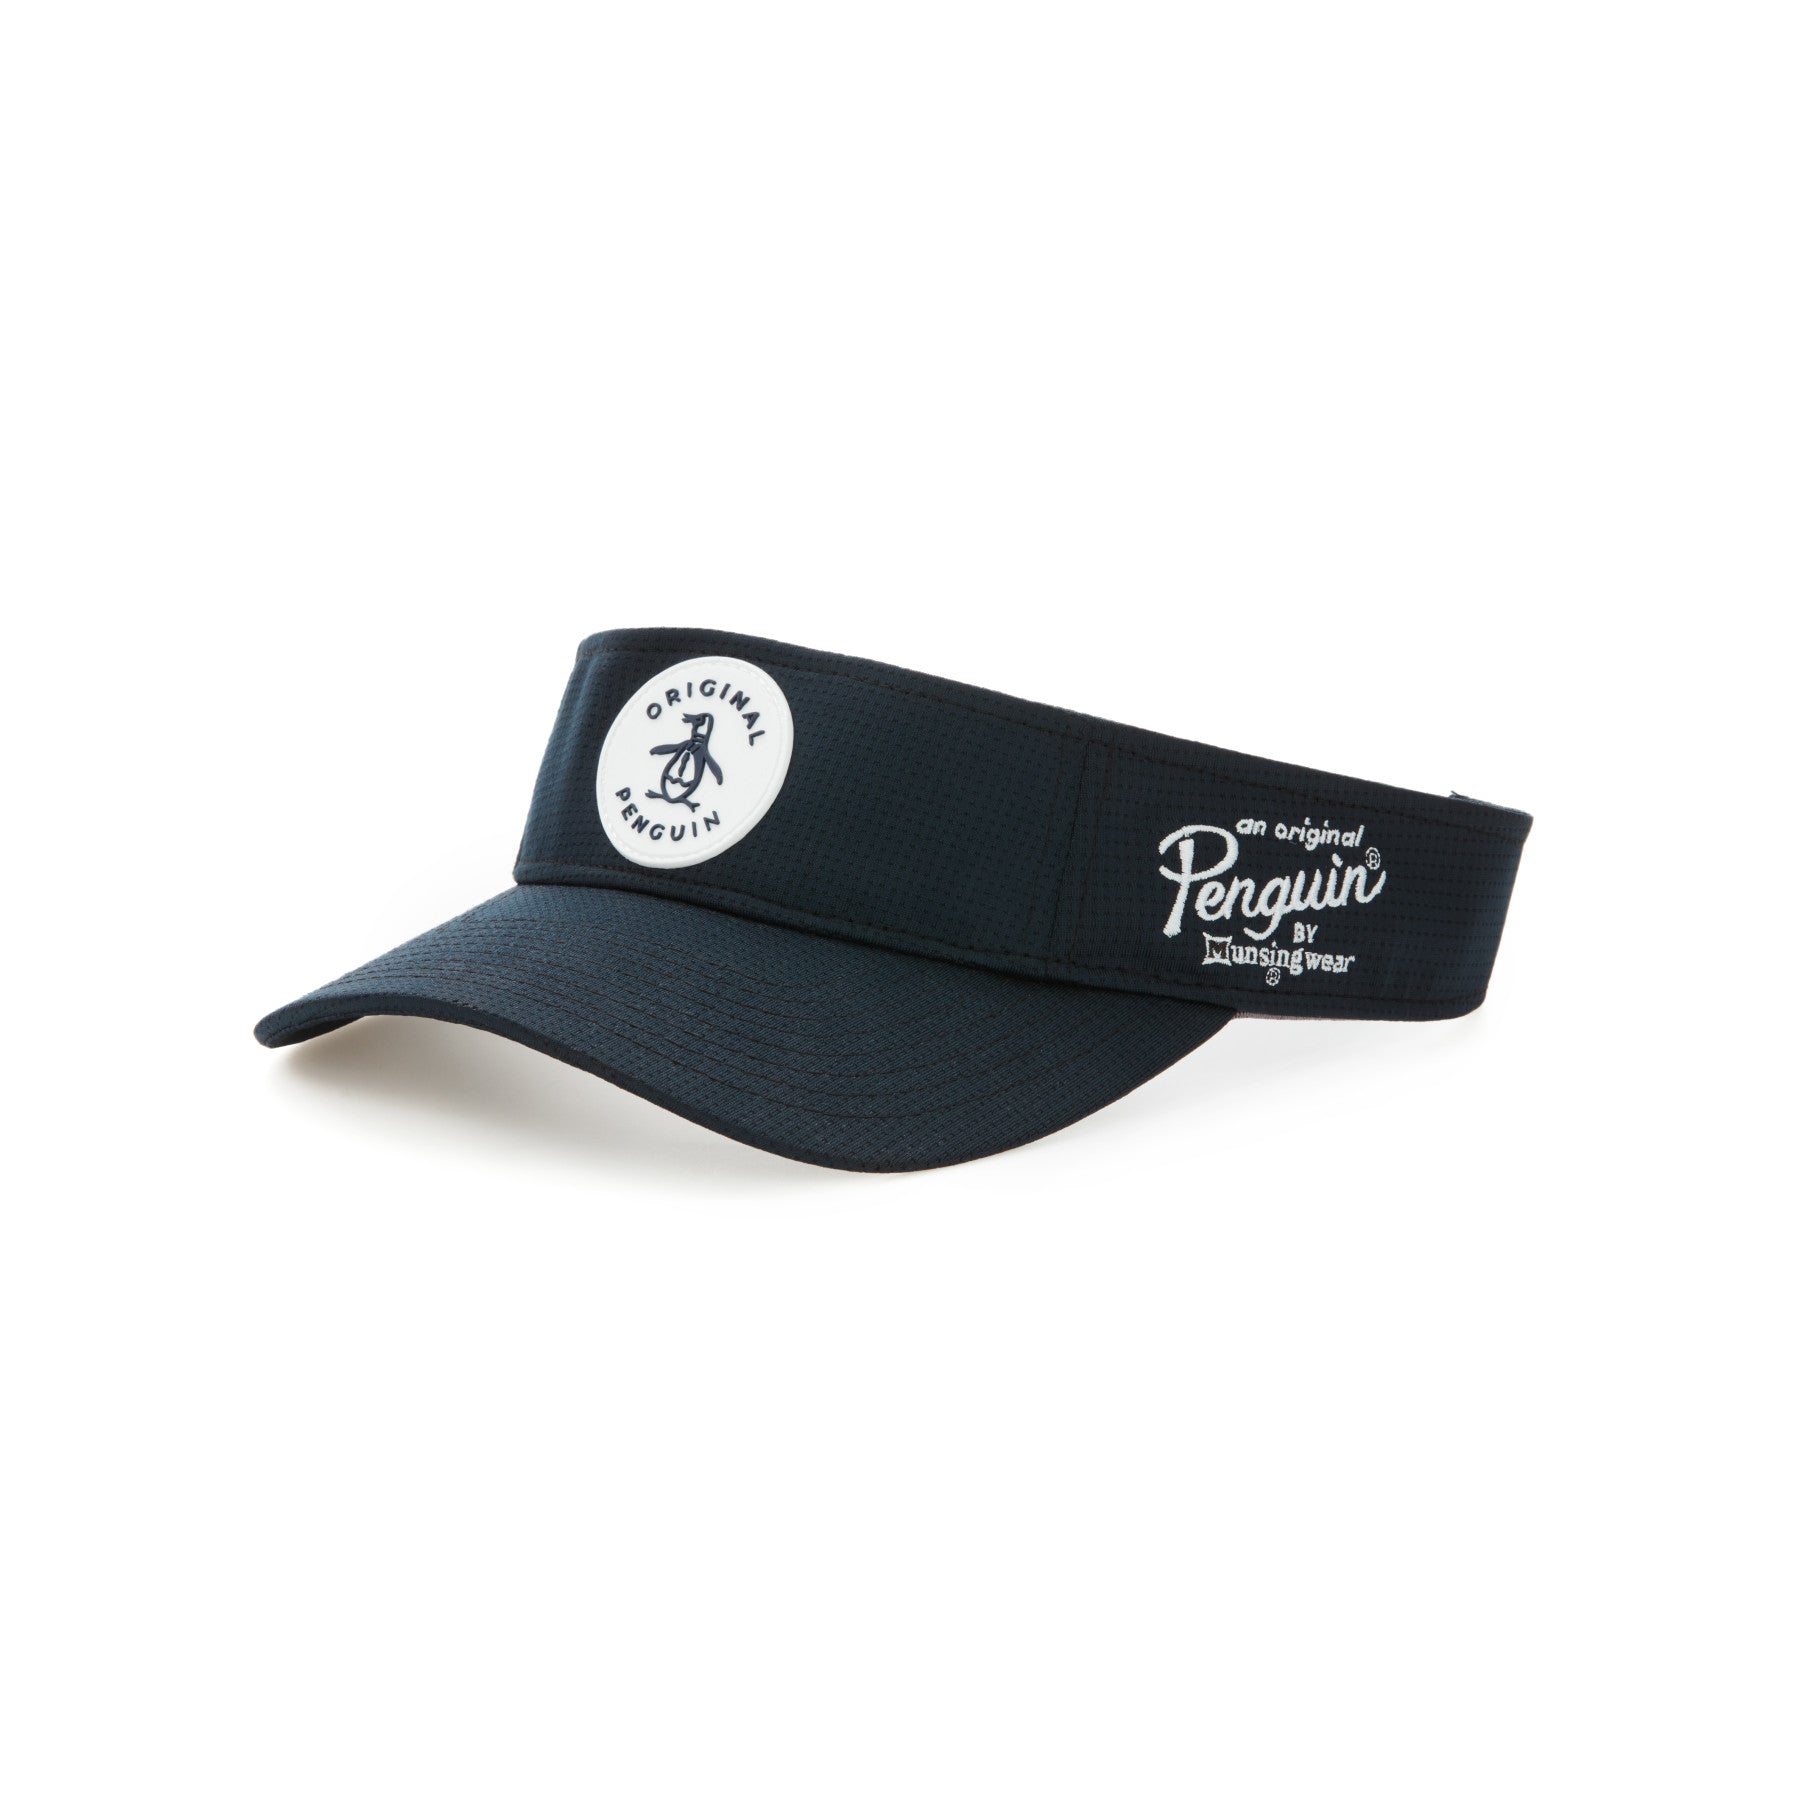 View Rubber Patch Golf Visor In Caviar information